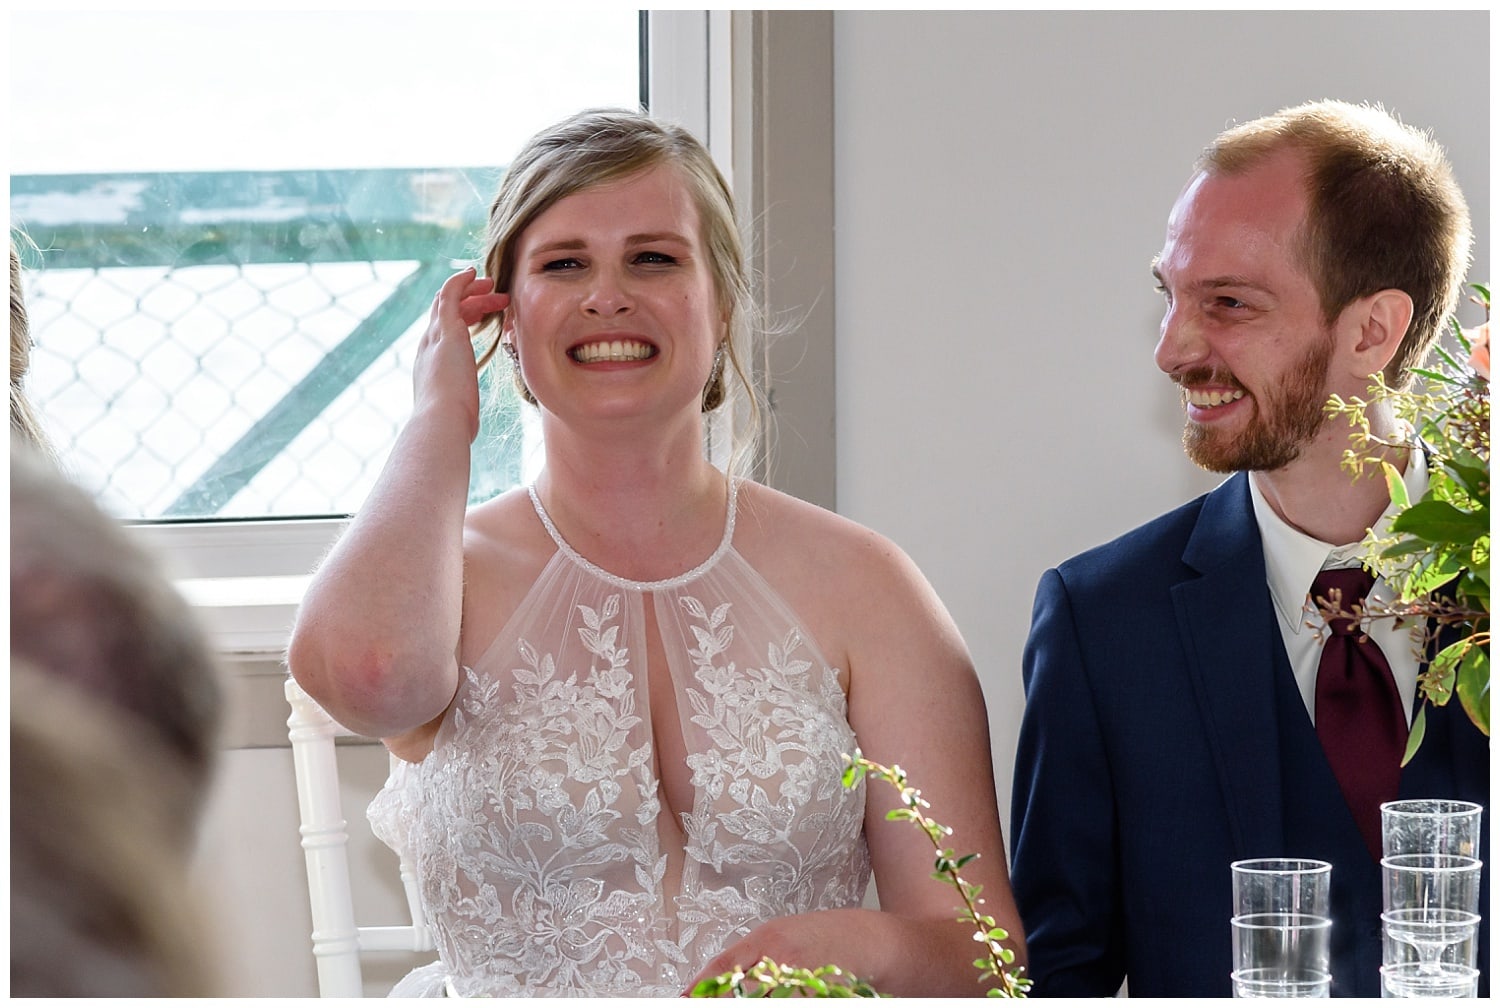 The bride is captured smiling largely during her wedding reception at the St Mary's Boat Club in Halifax NS.